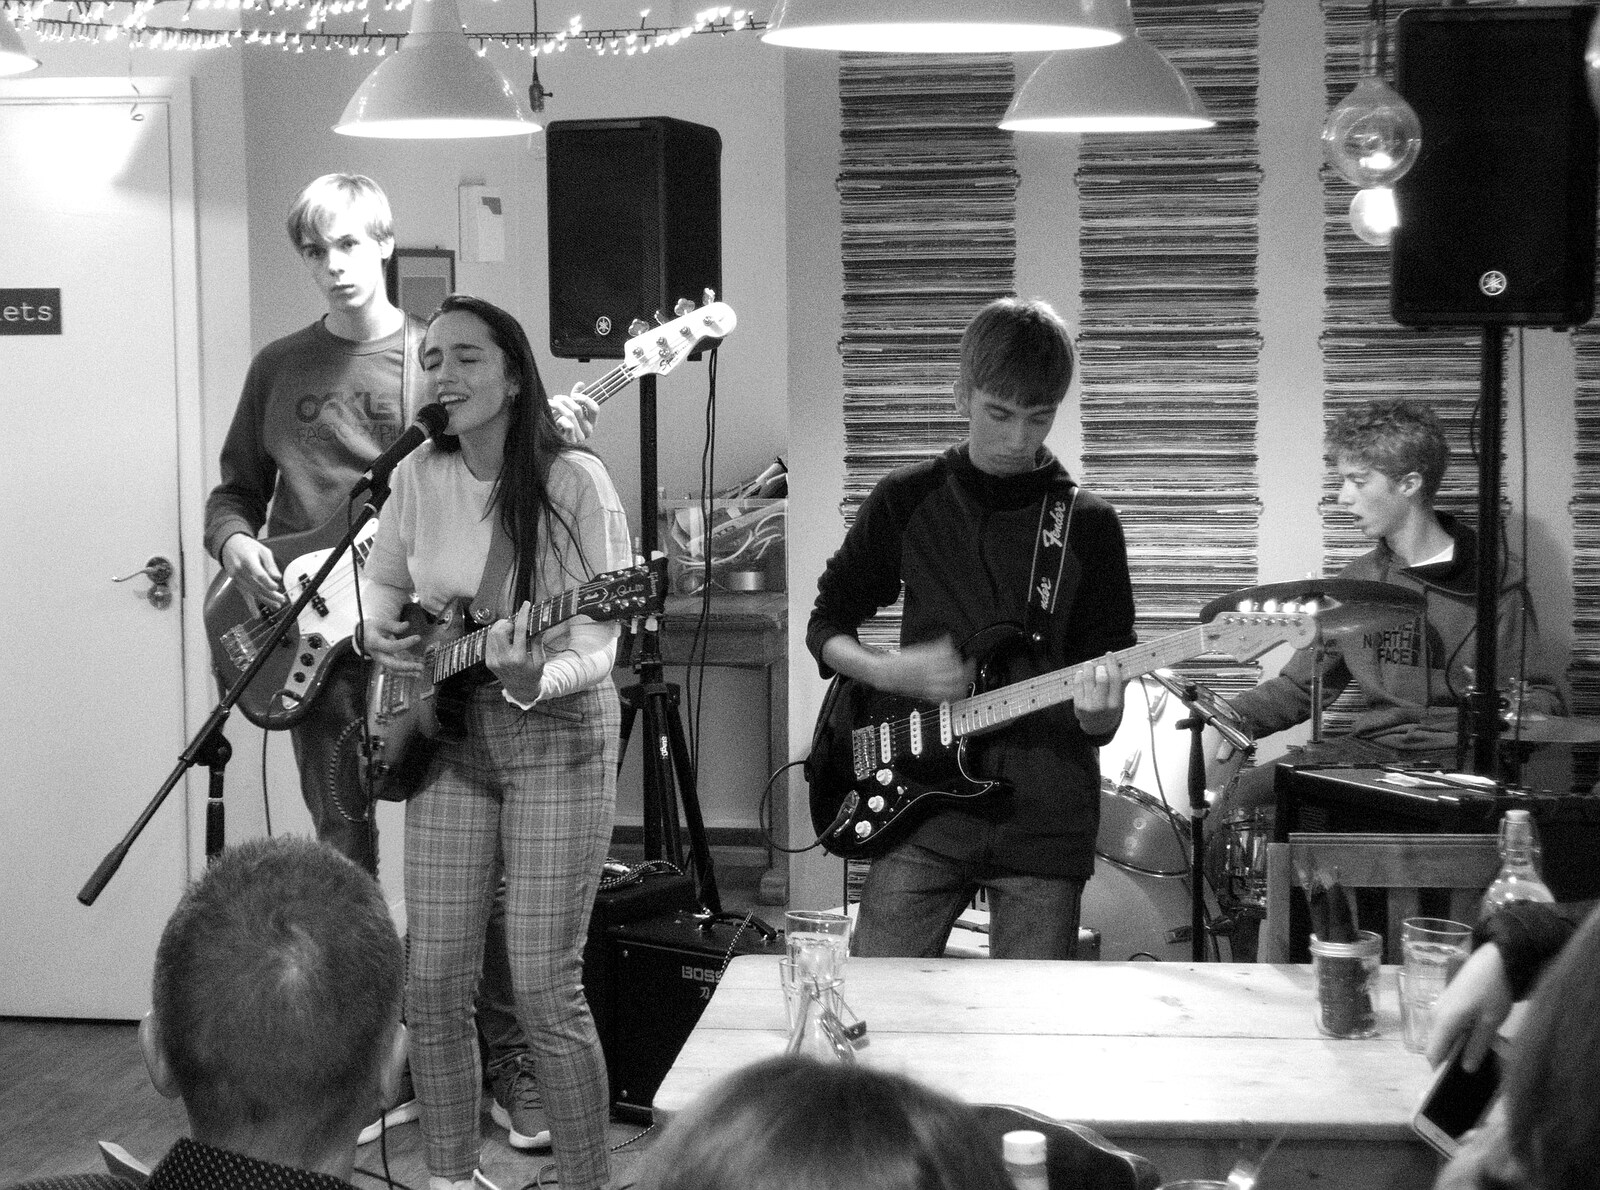 The young band do their thing from A Musical Night on Mill Road, Cambridge - 8th September 2019